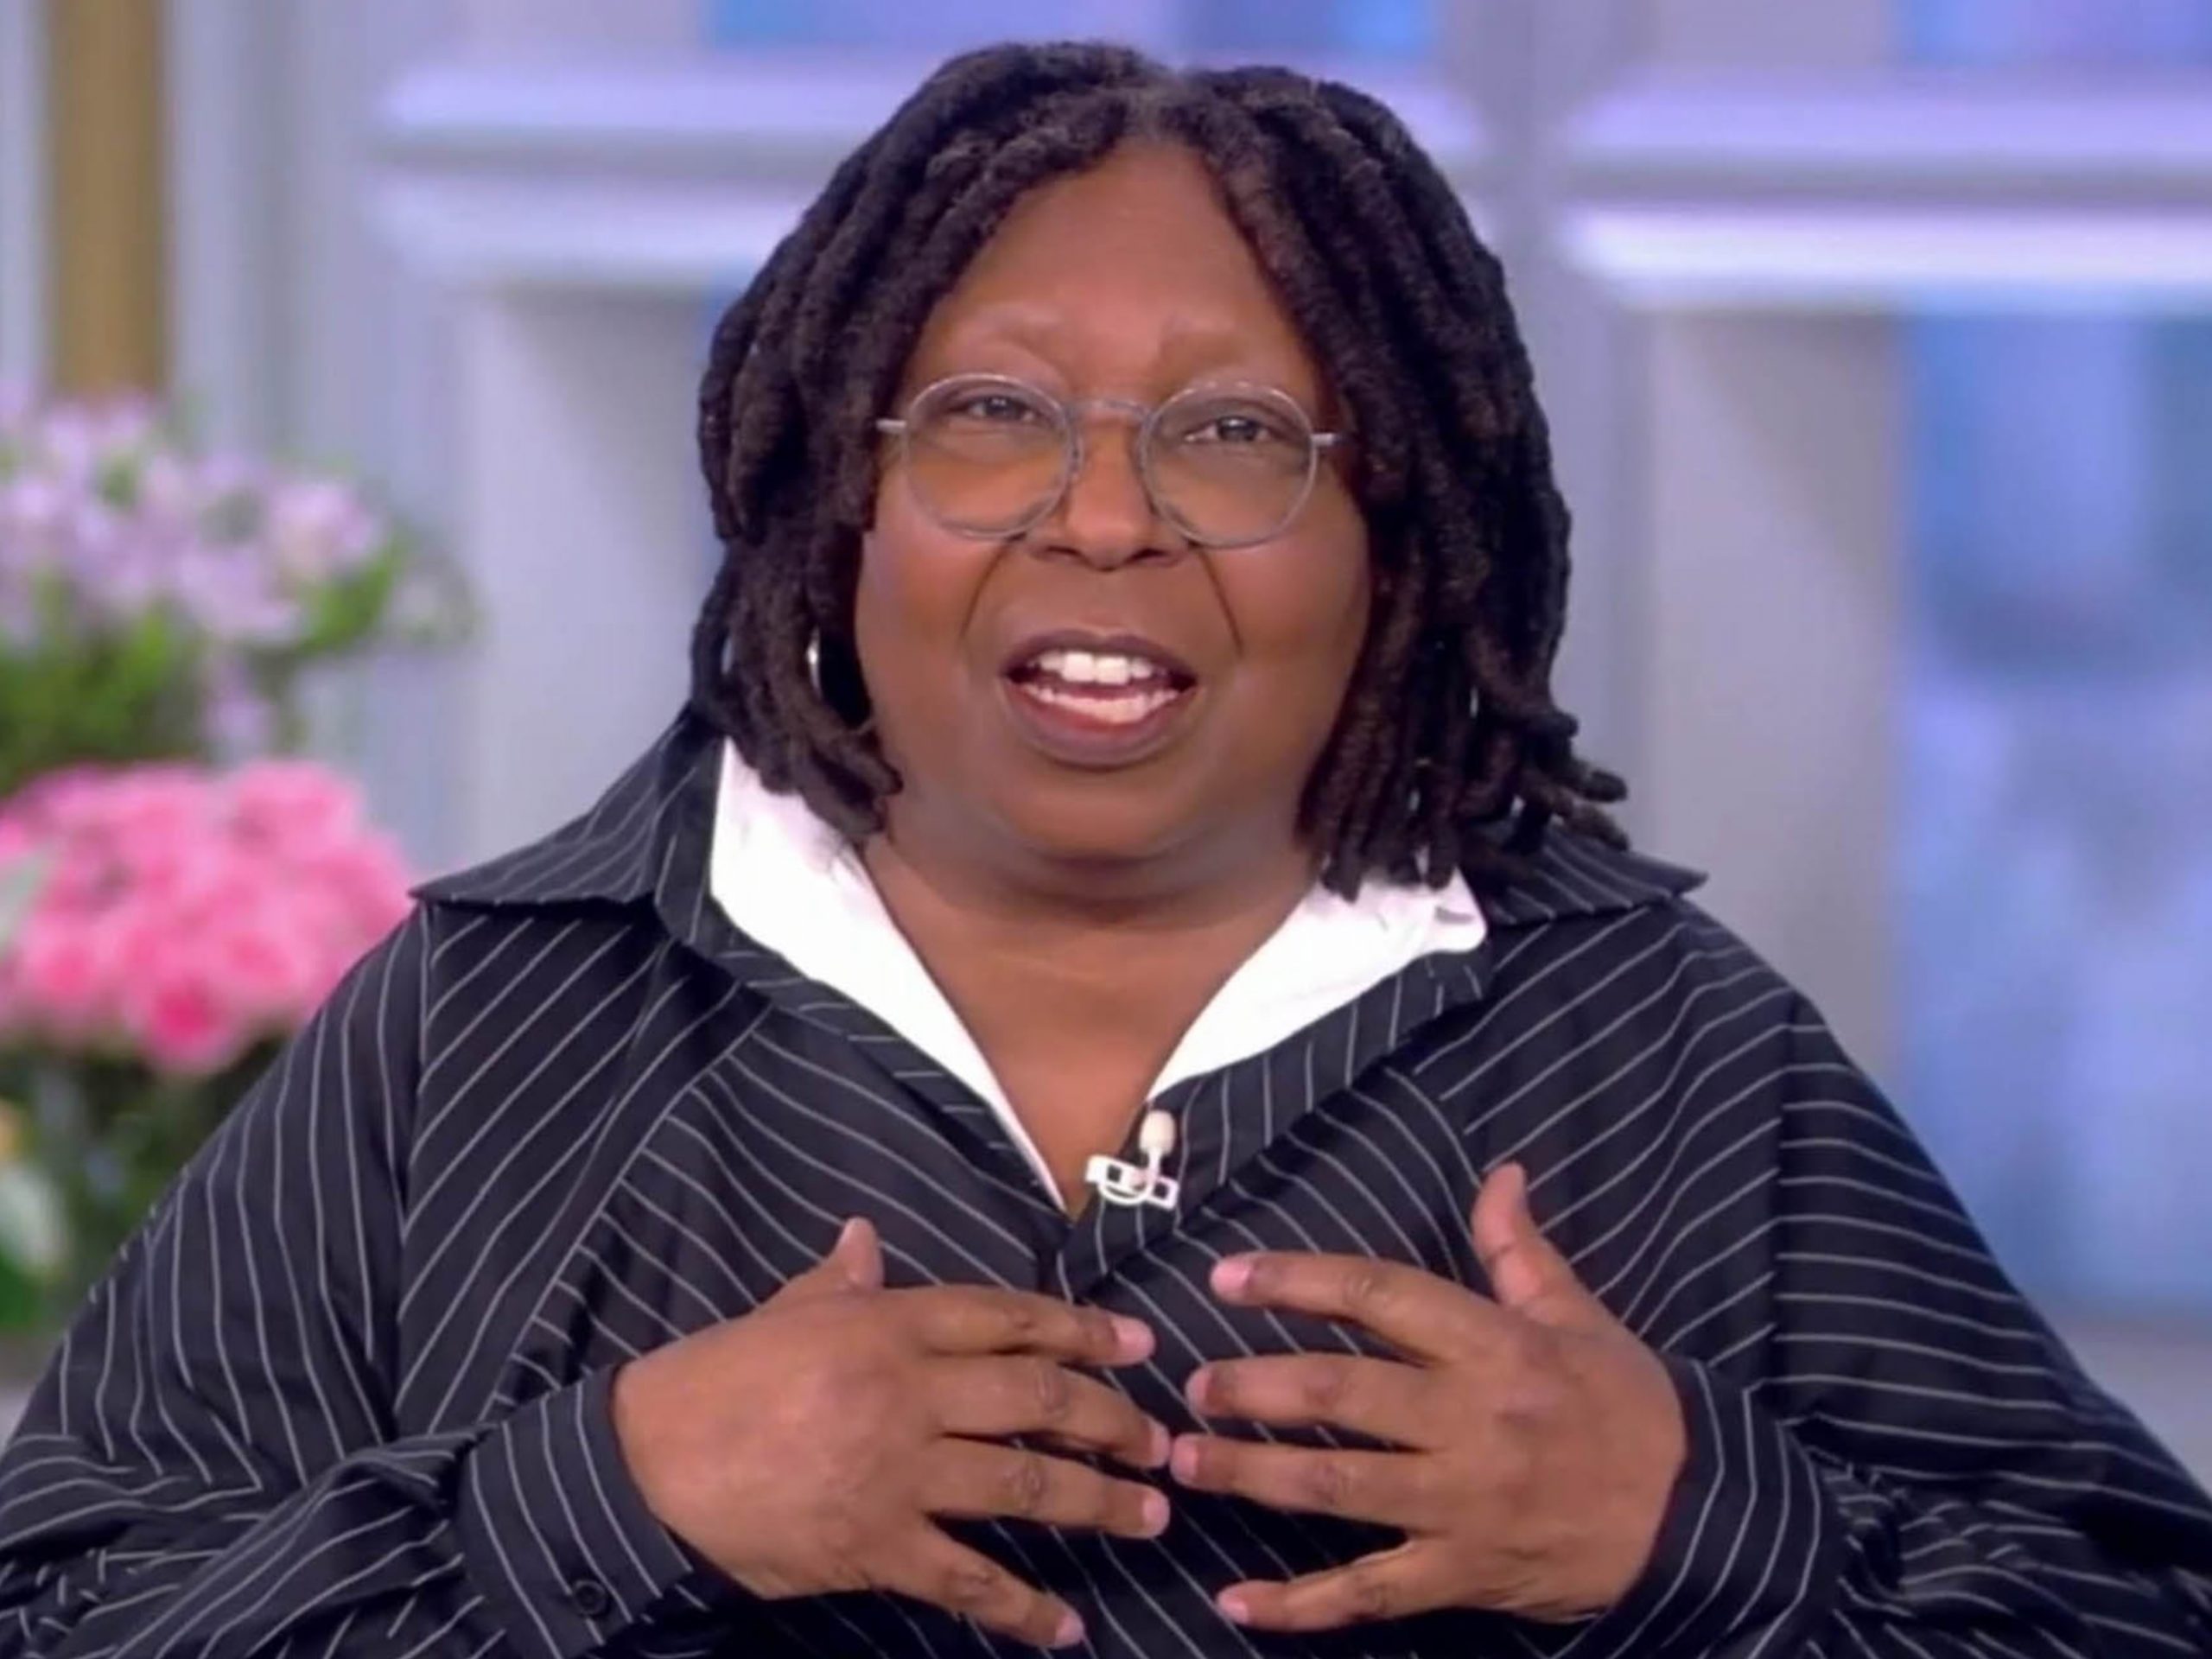 Whoopi Goldberg Suspended From ‘The View’ For Her Holocaust Remarks